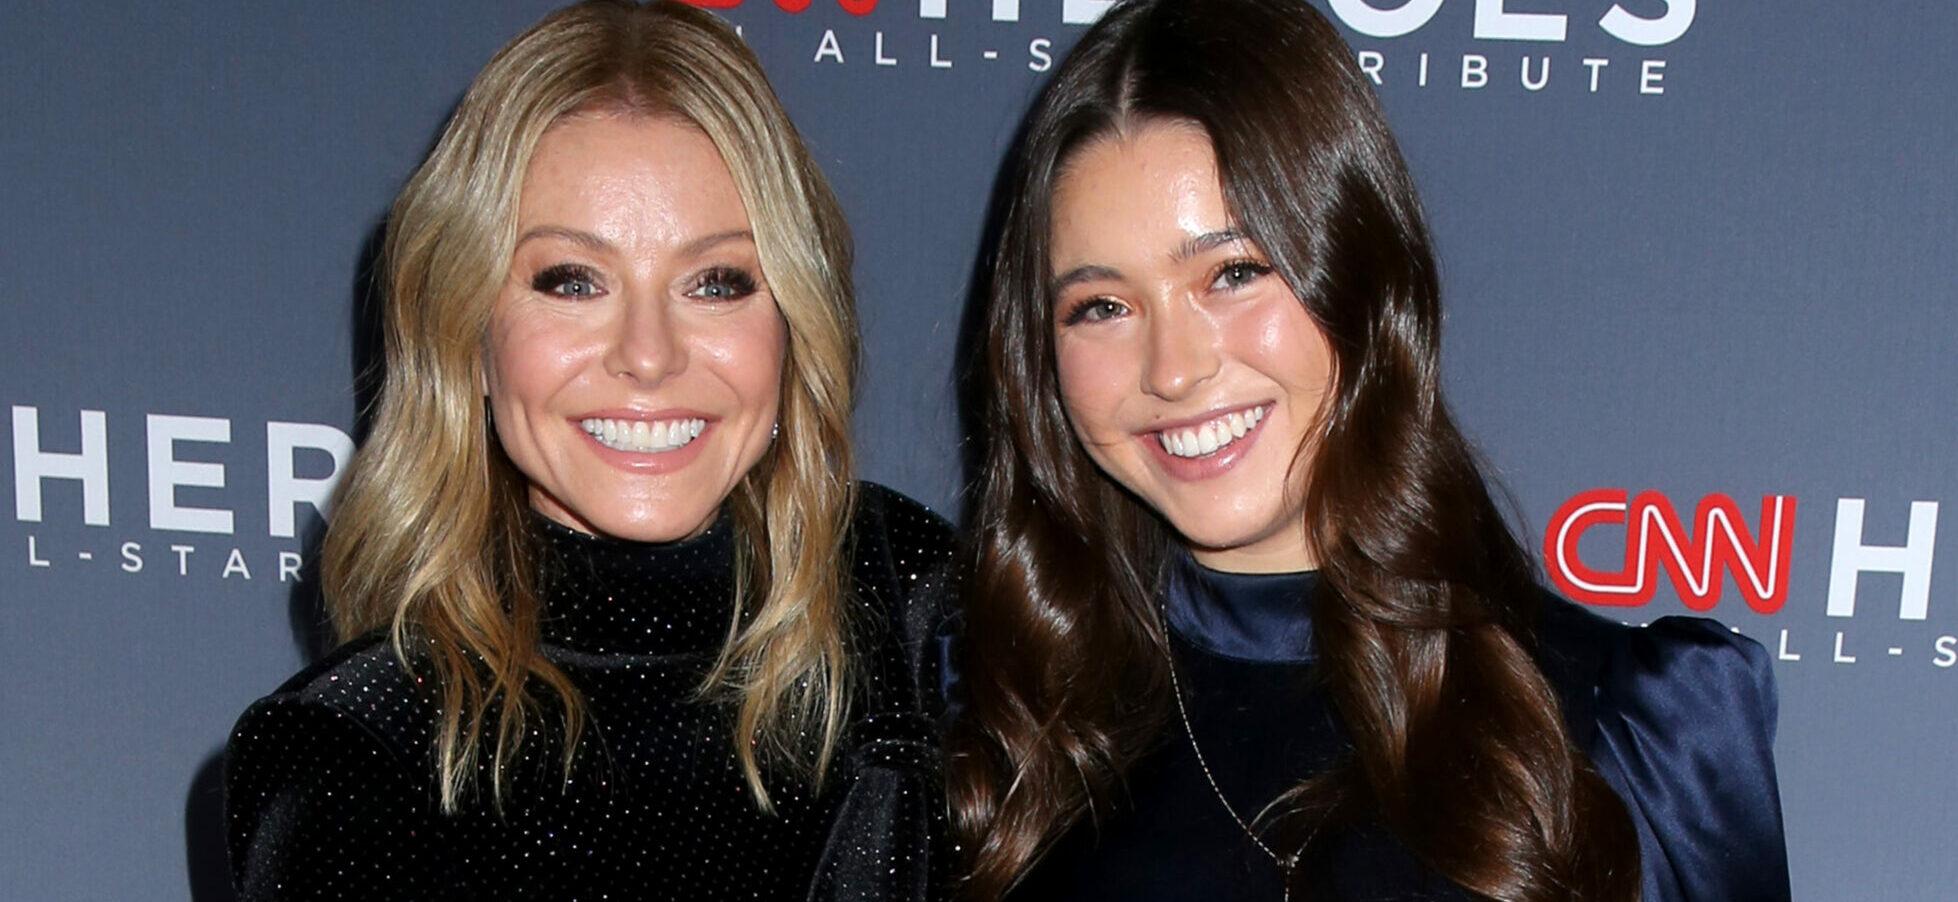 Kelly Ripa’s Daughter Lola Consuelos Has An Exciting Week Ahead – Here’s Why!